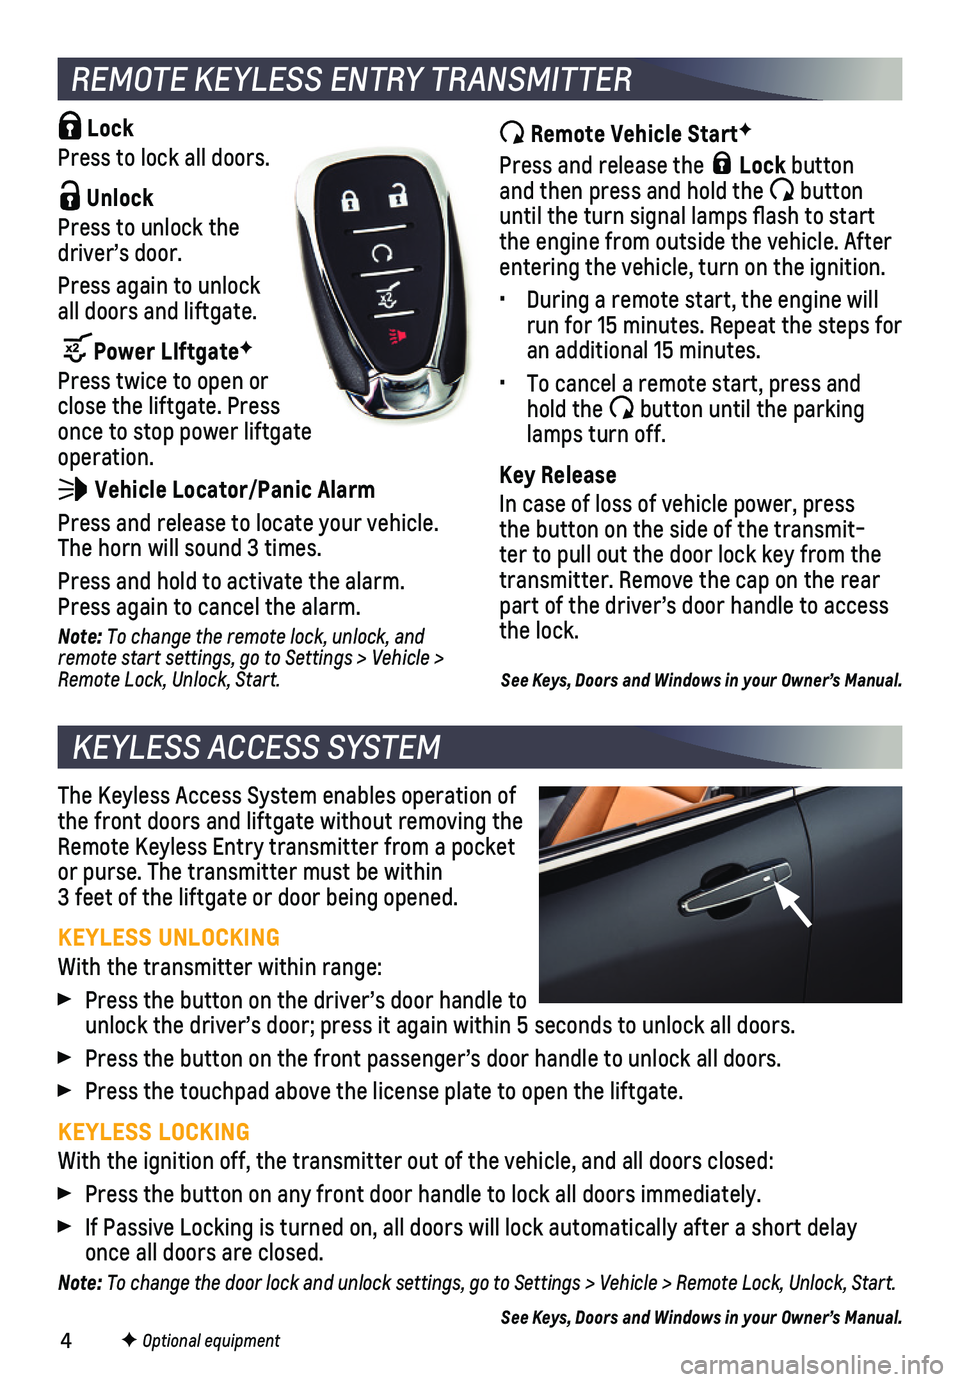 CHEVROLET EQUINOX 2020  Get To Know Guide 4
The Keyless Access System enables operation of the front doors and liftgate without removing the Remote Keyless Entry transmitter from a pocket or purse. The transmitter must be within  3 feet of th